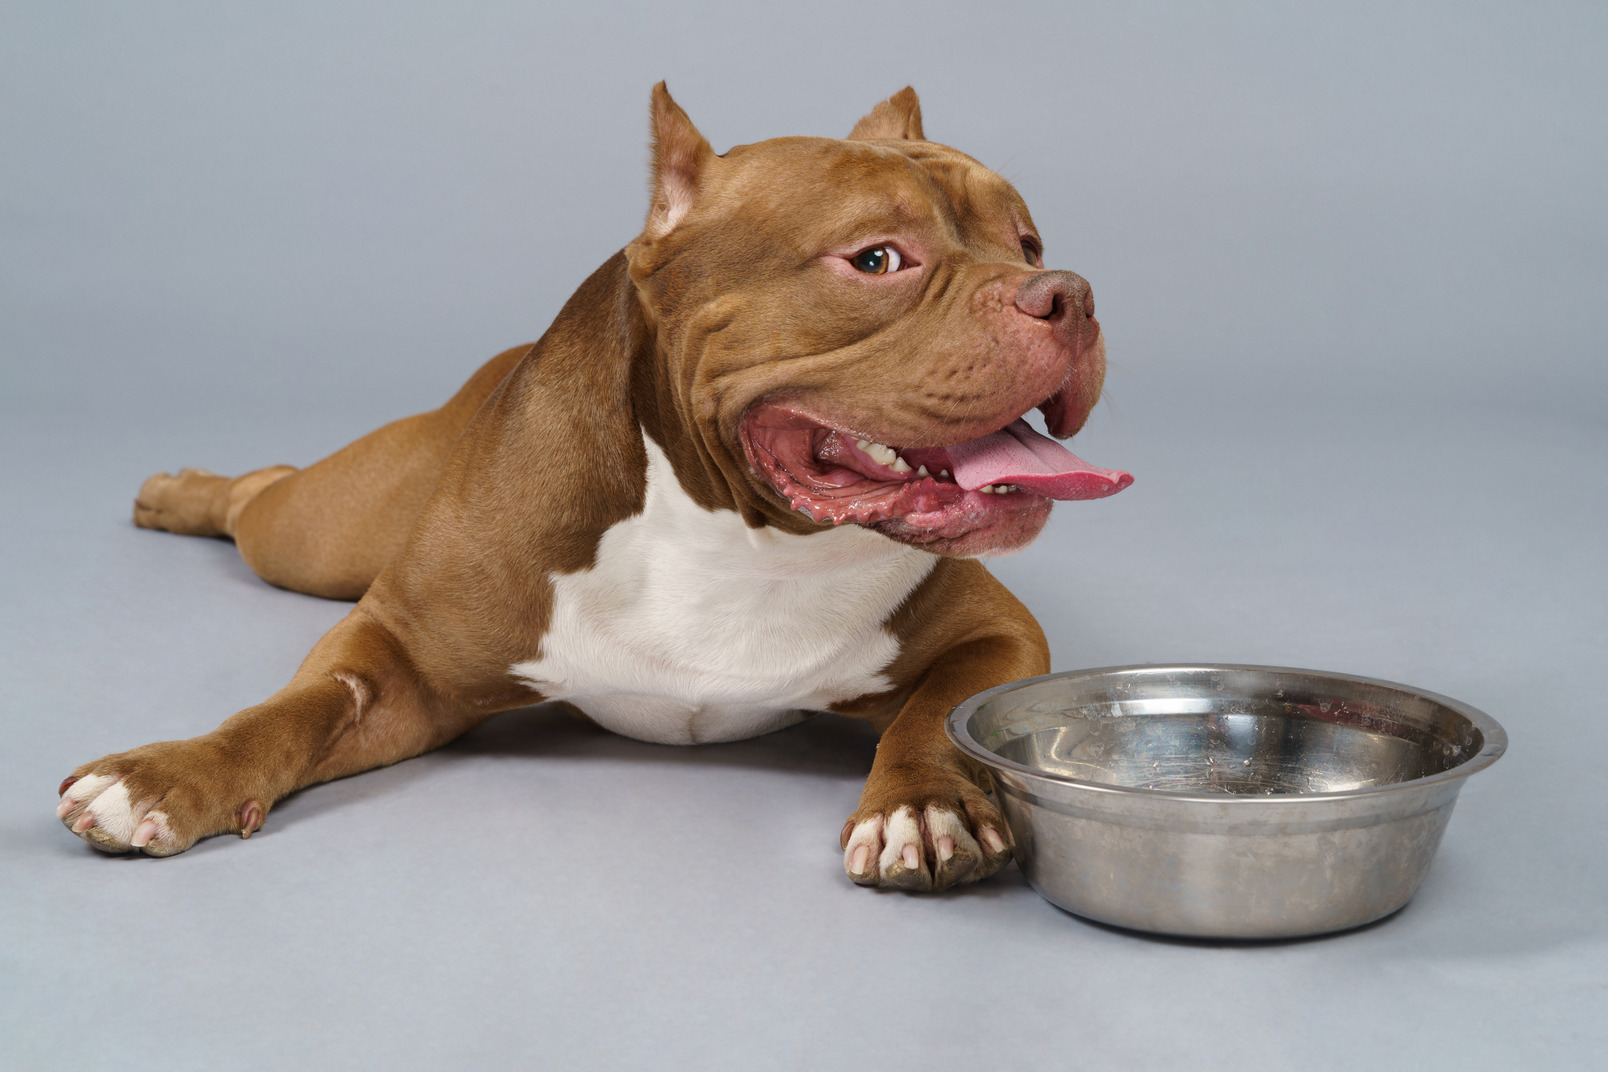 Front view of a brown bulldog lying near the steel bowl and looking at camera